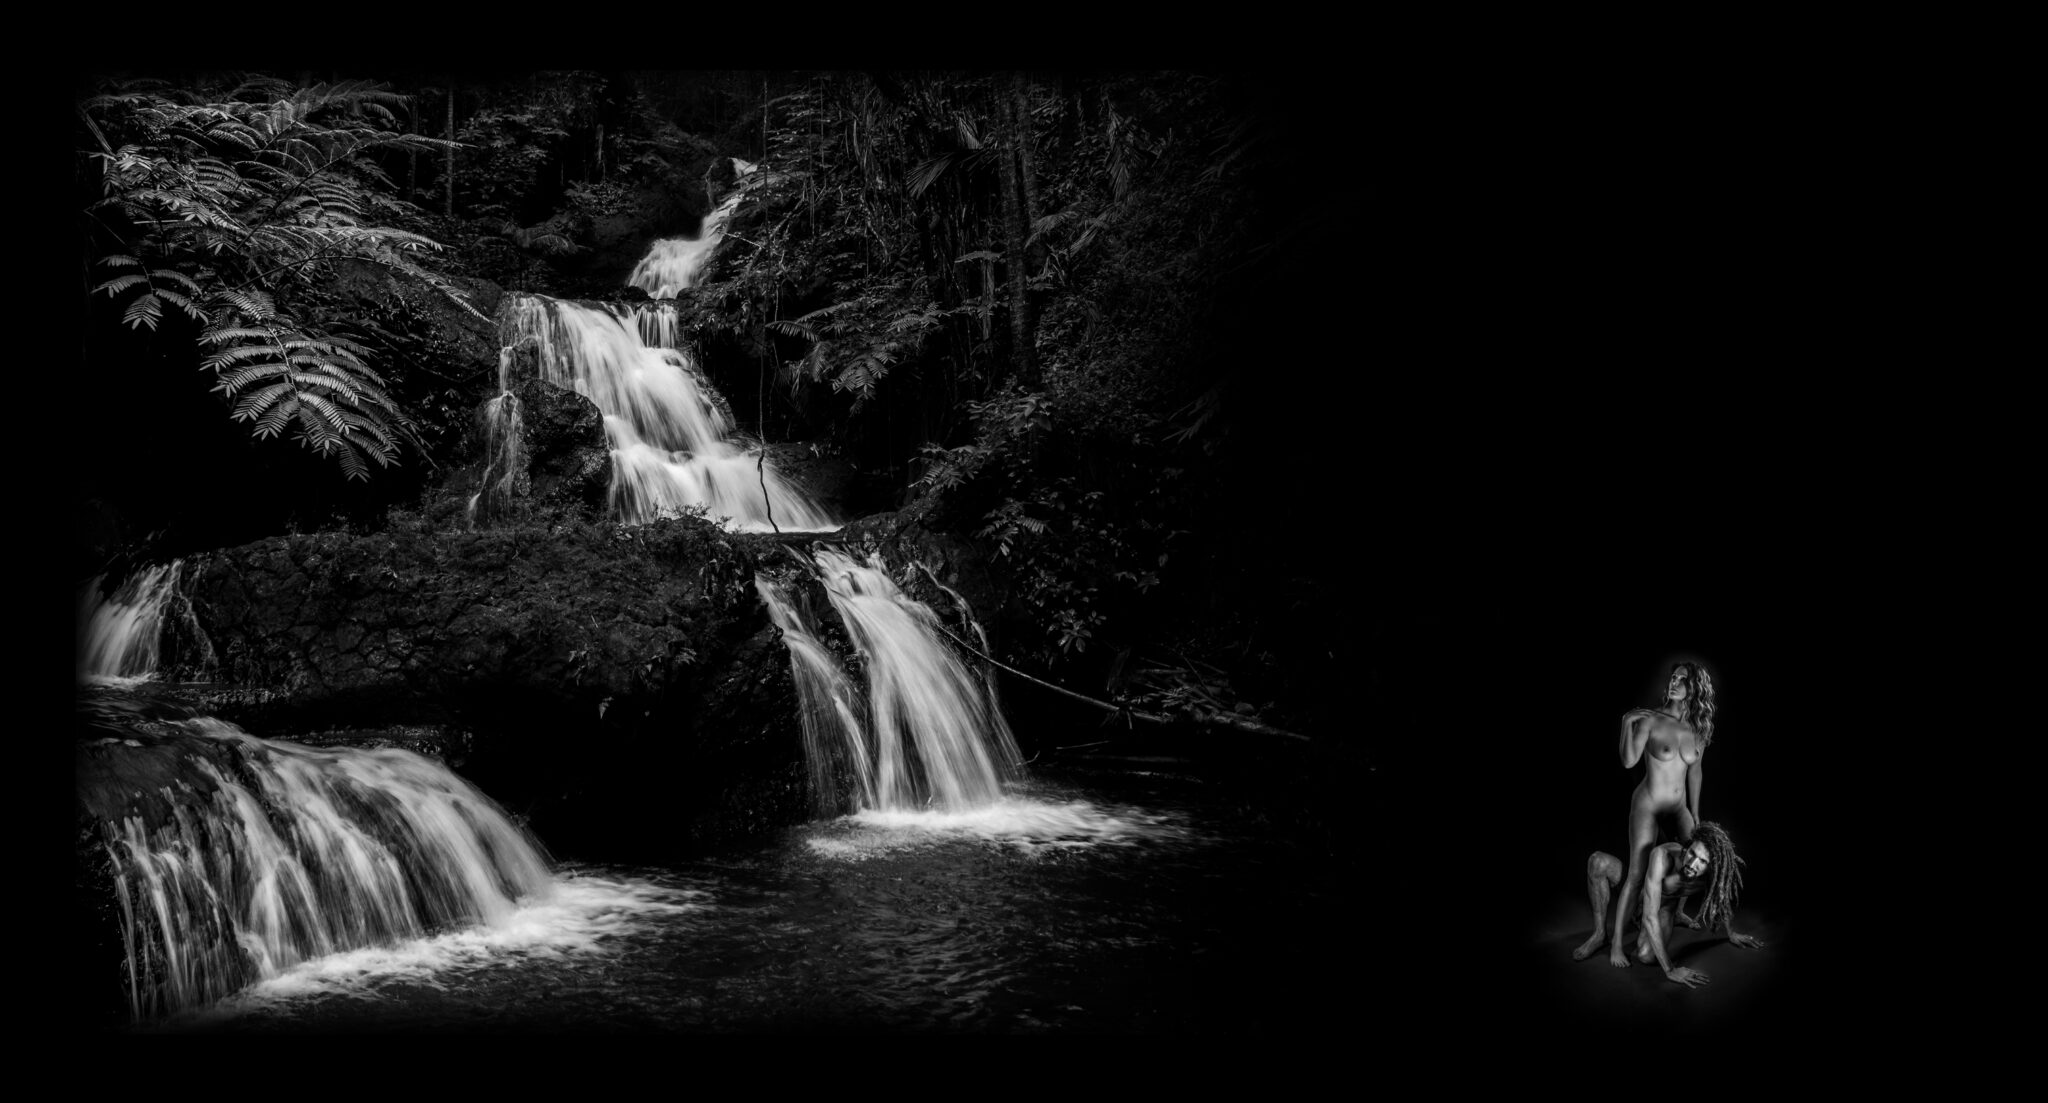 Black and white photograph of a nude couple against a backdrop of a waterfall that is depicting the story of Pontus being born from Gaia.